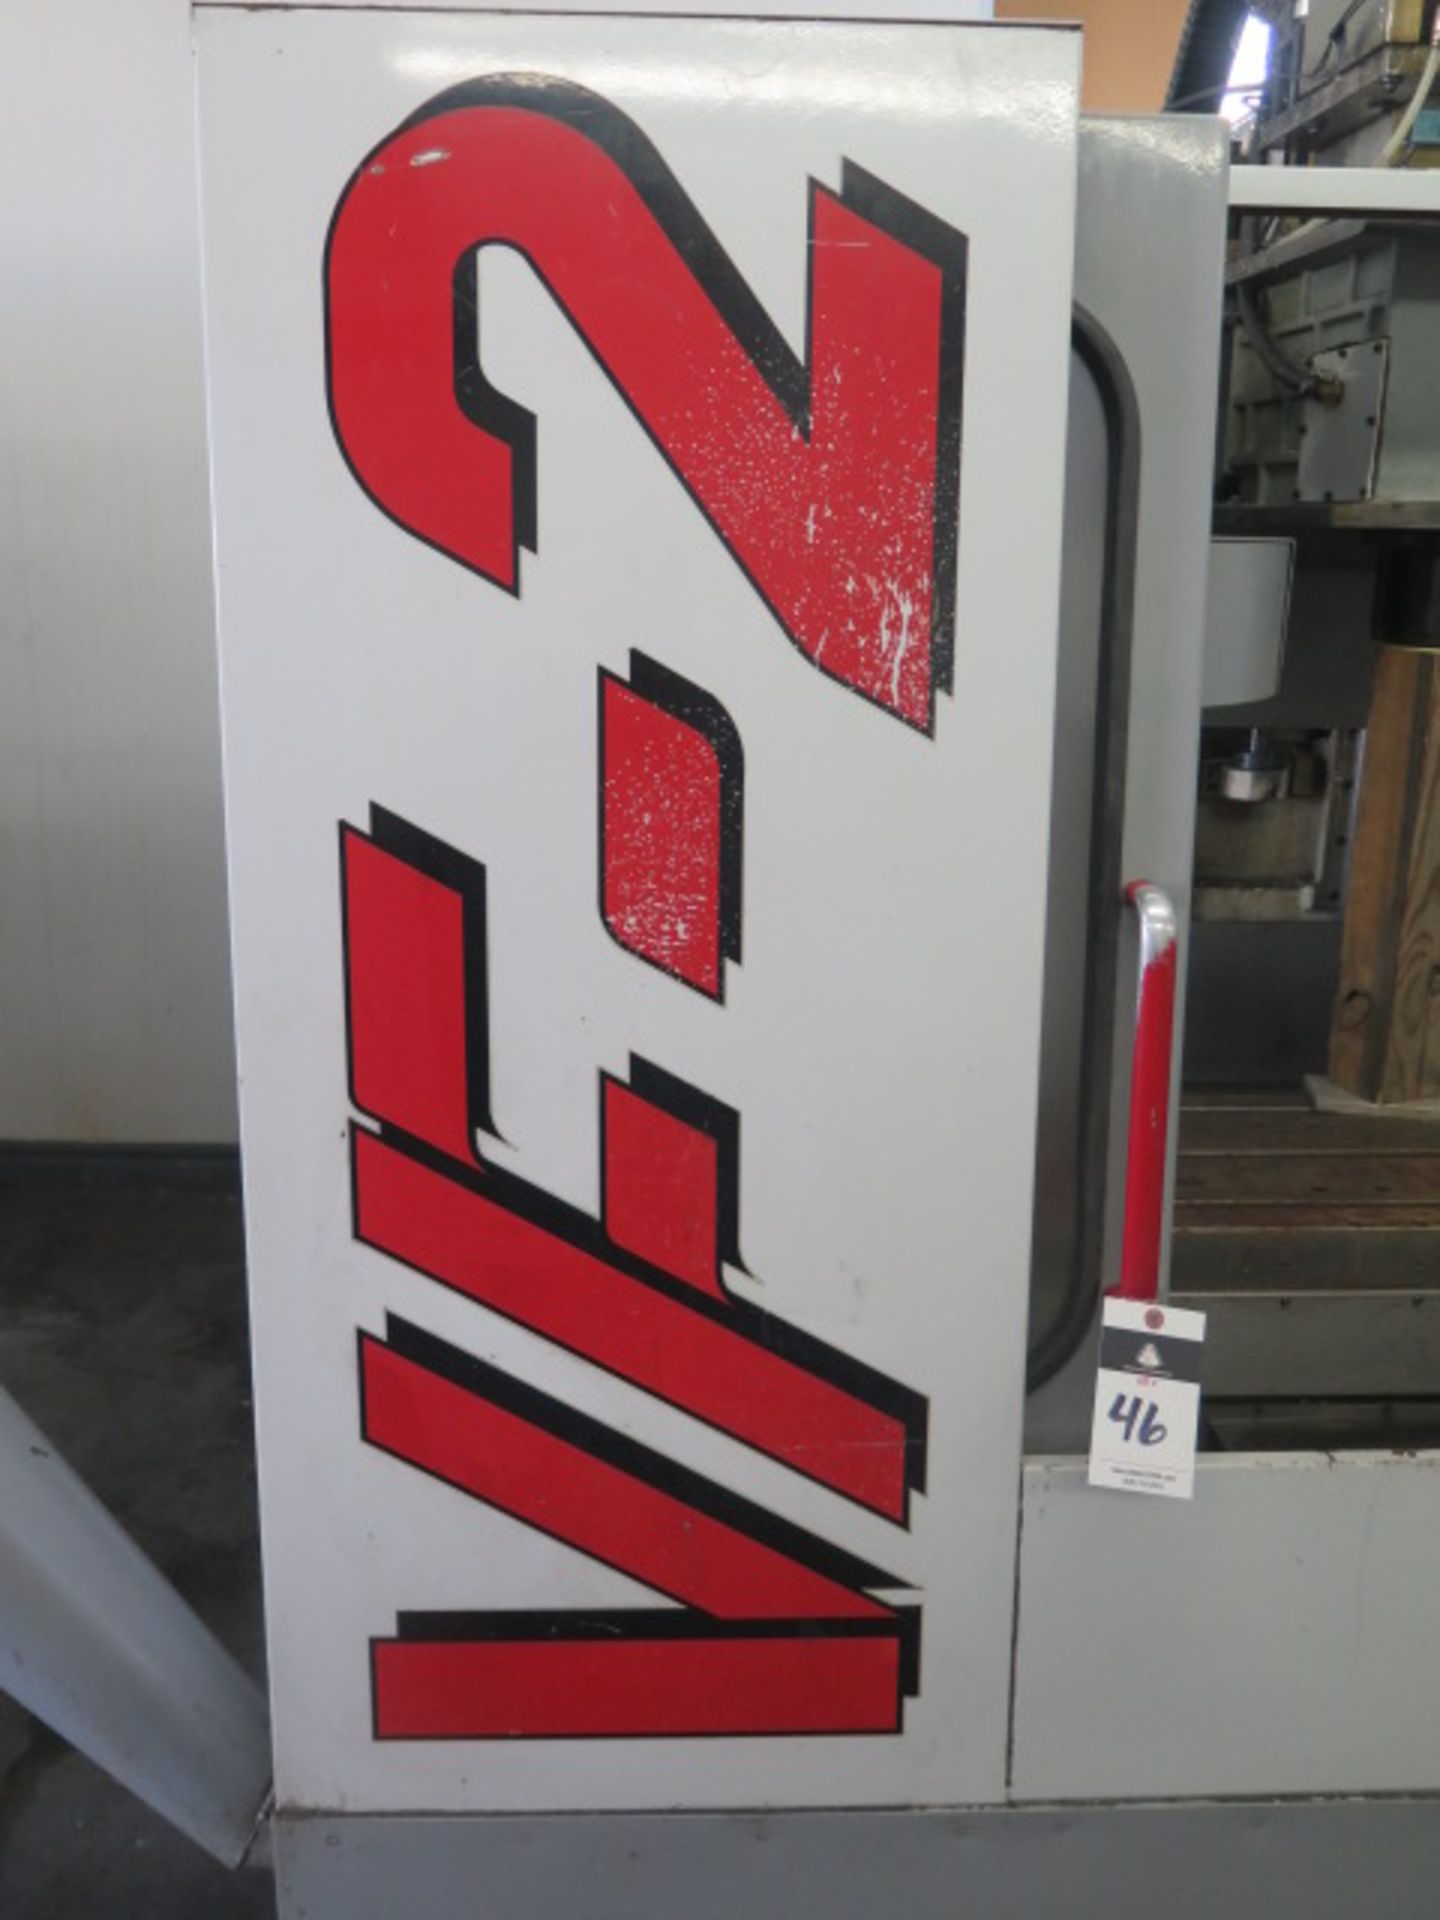 1997 Haas VF-2 4-Axis CNC Vertical Machining Center s/n 11264 w/ Haas Controls, 21-Station ATC - Image 3 of 14